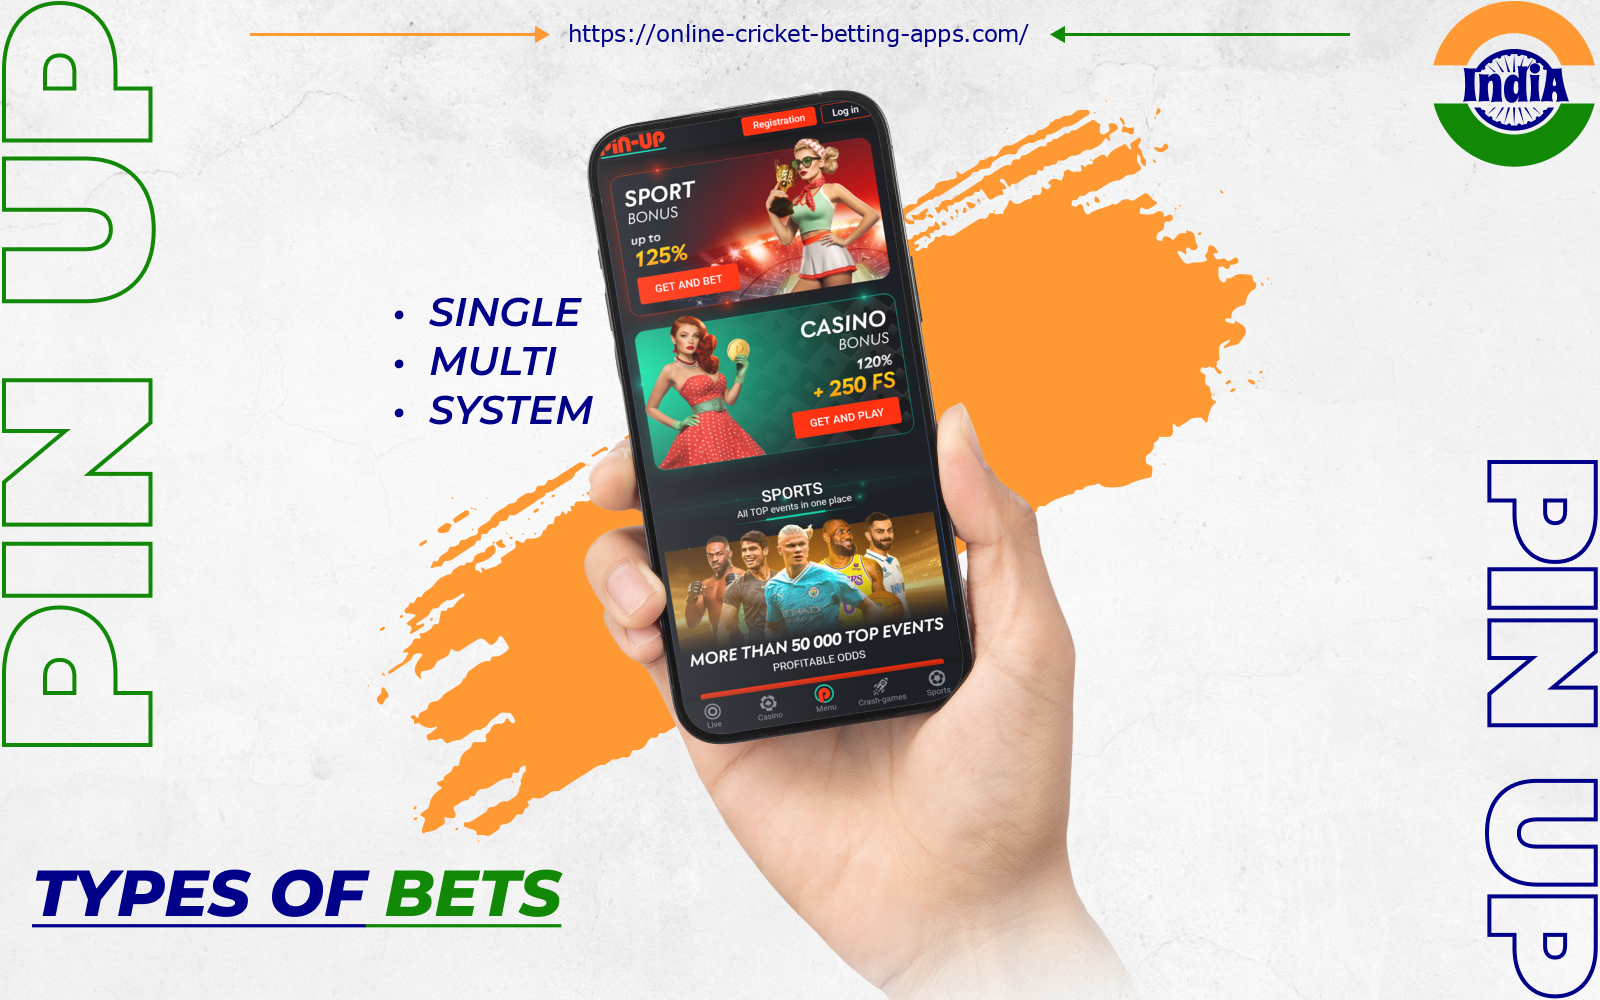 To provide Indian PinUp users with maximum betting variation, the bookmaker has added three types of bets